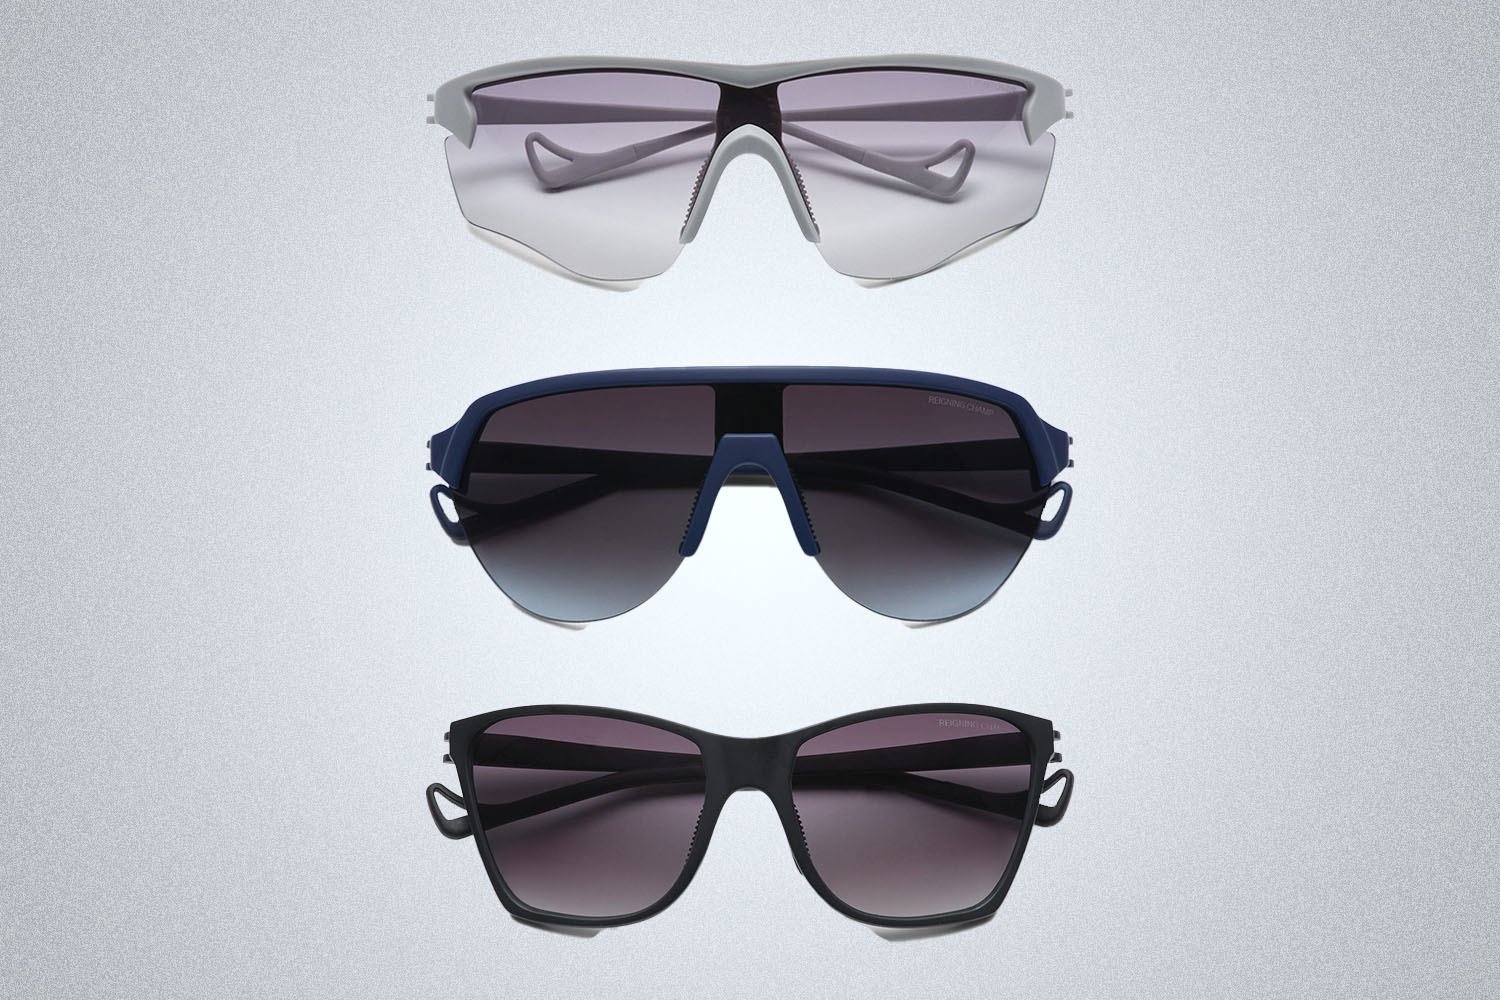 three pairs of Reigning Champ x District Vision sunglasses in a vertical column on a light grey background